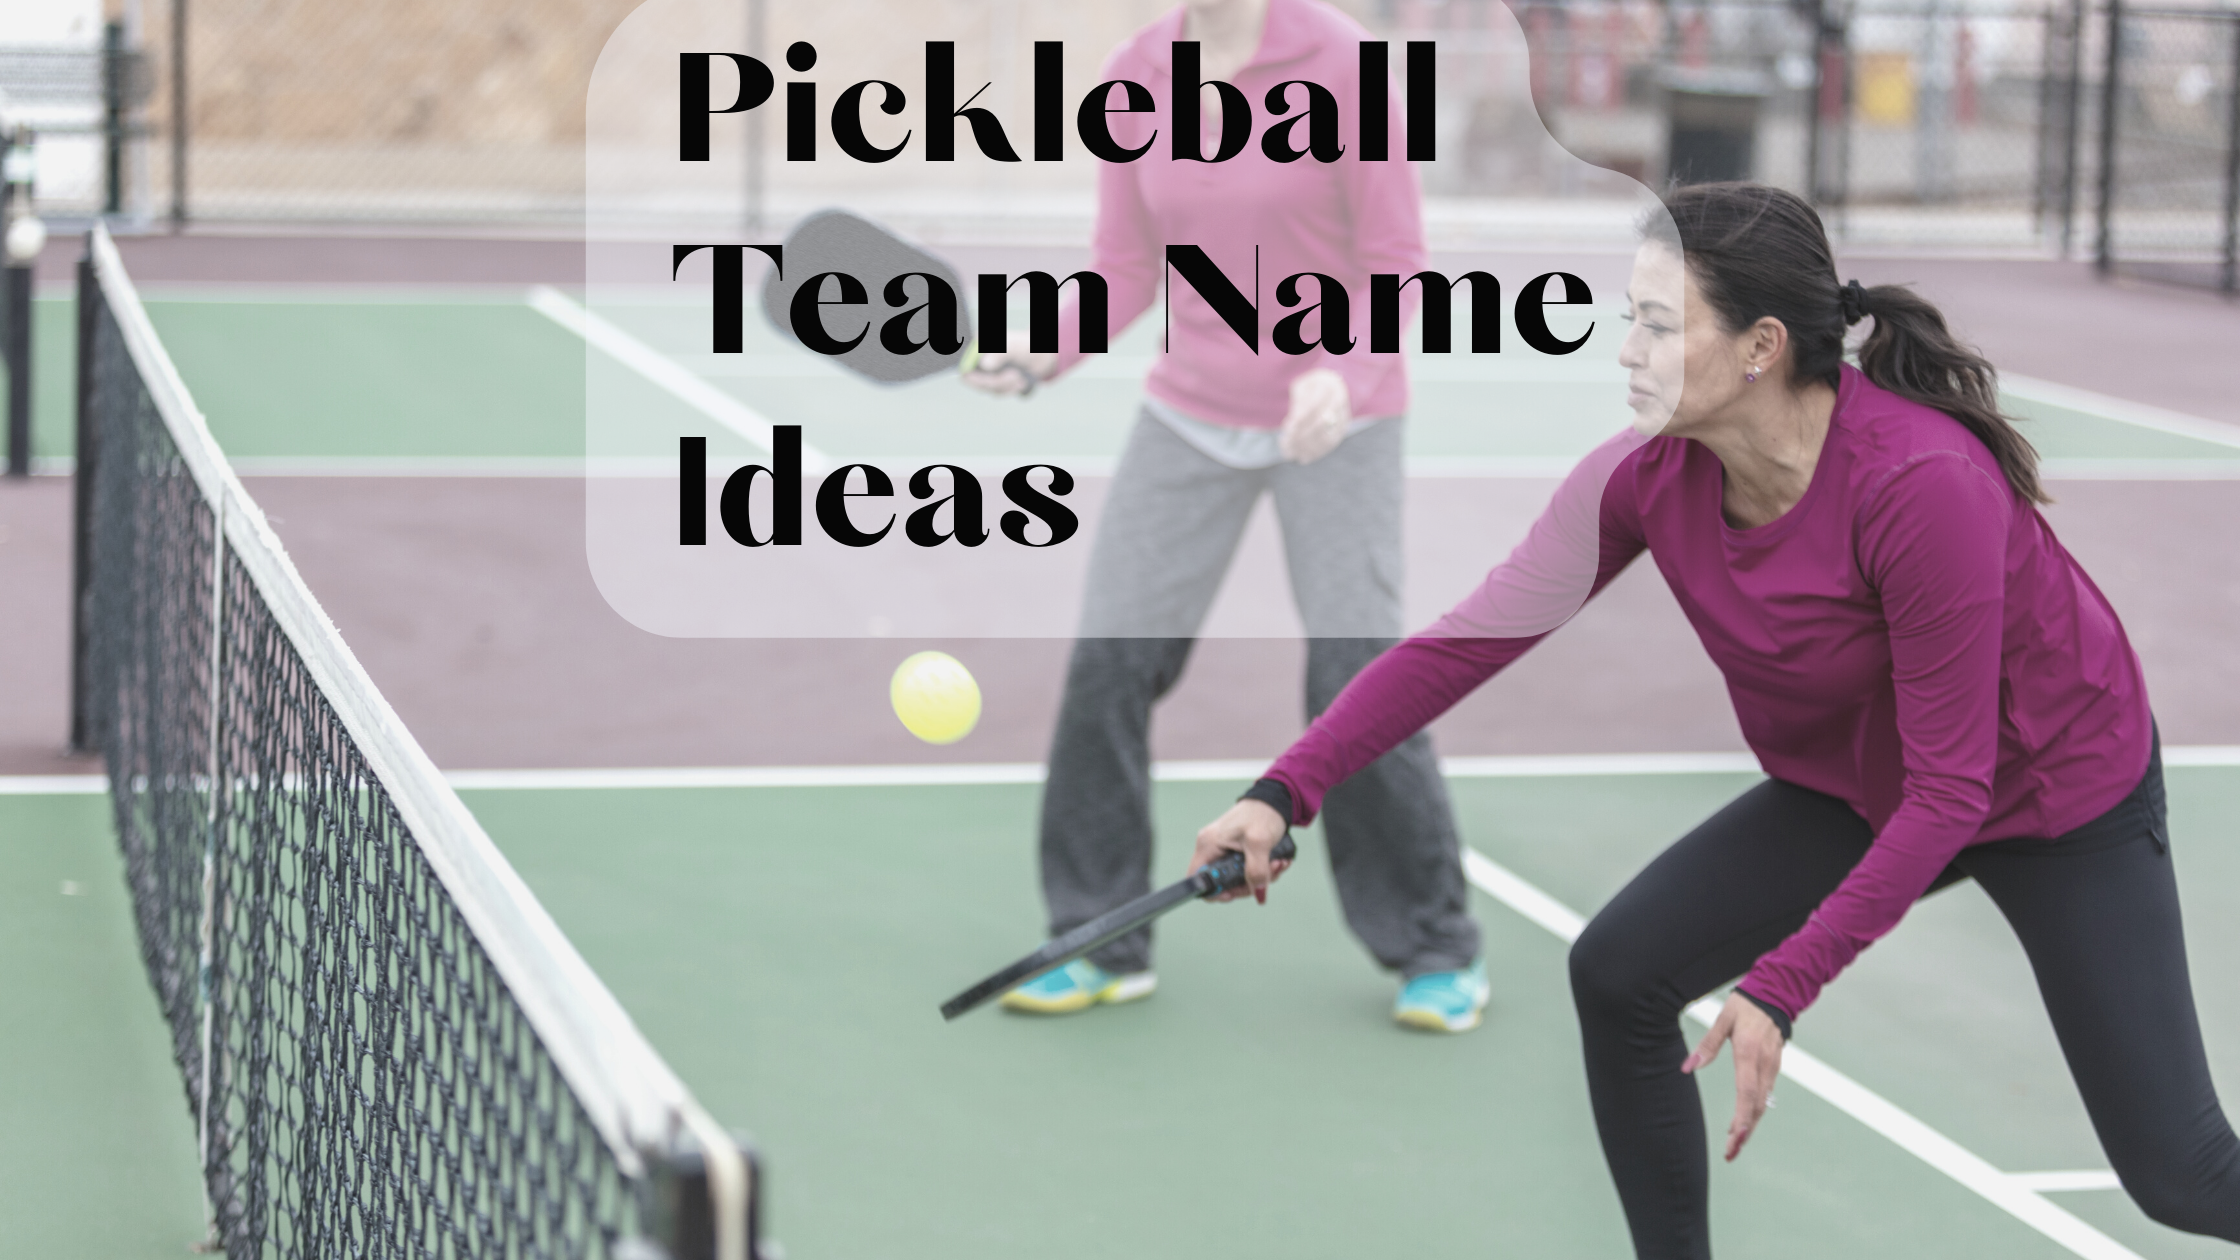 200+ Catchy Pickleball Team Names Ideas: The Ultimate List of Suggestions